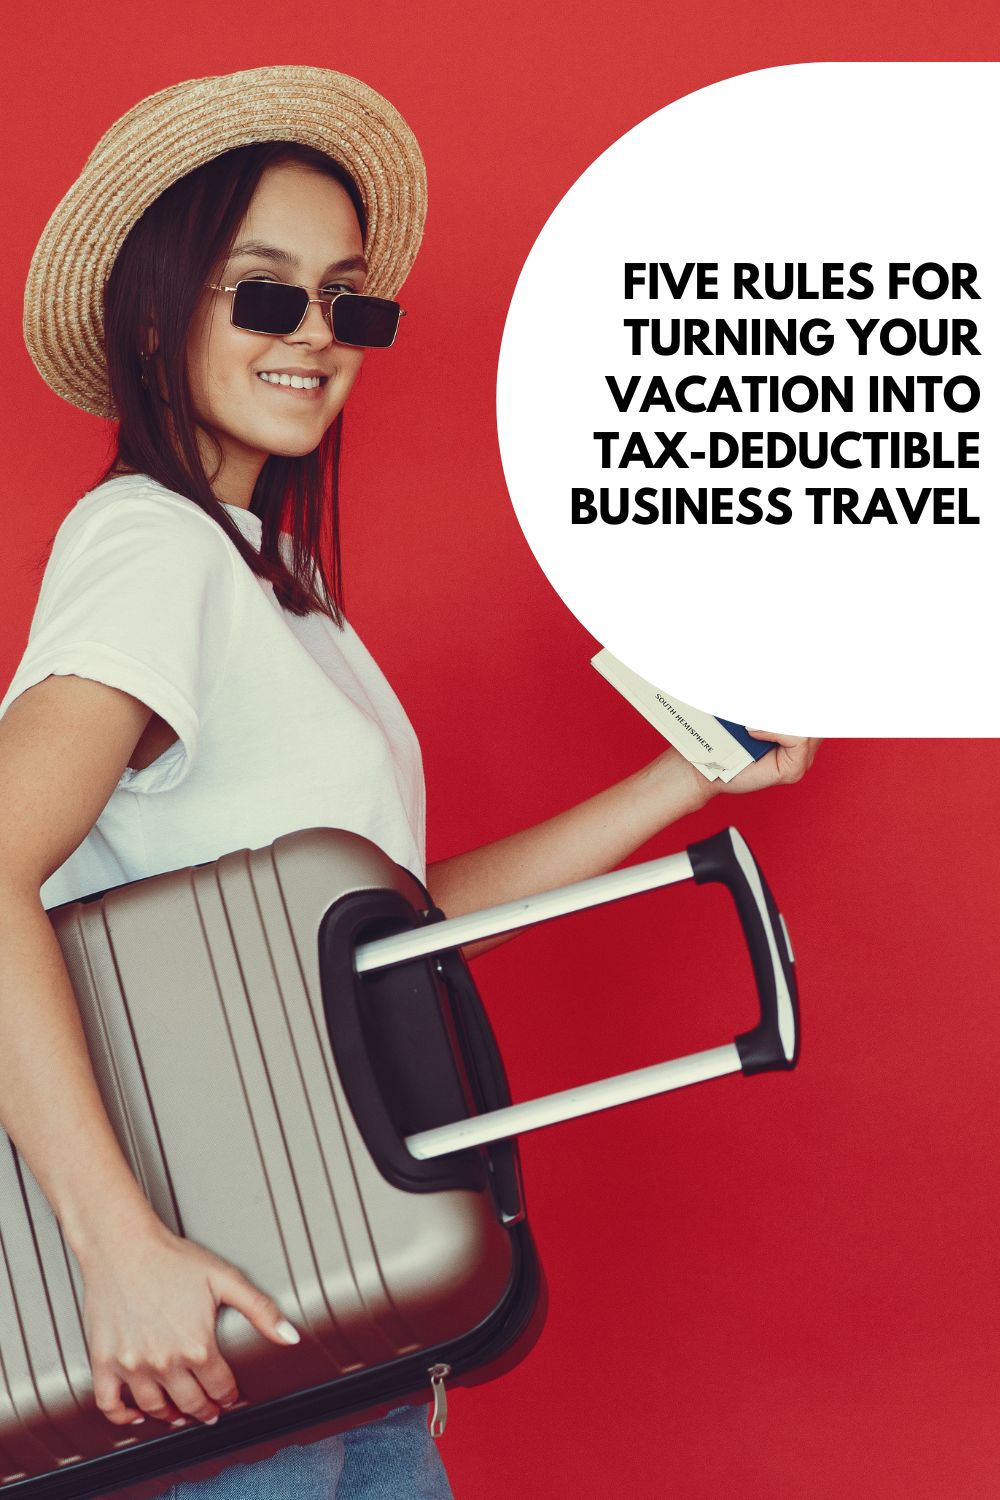 Five Rules for Turning Your Vacation into Tax-Deductible Business Travel